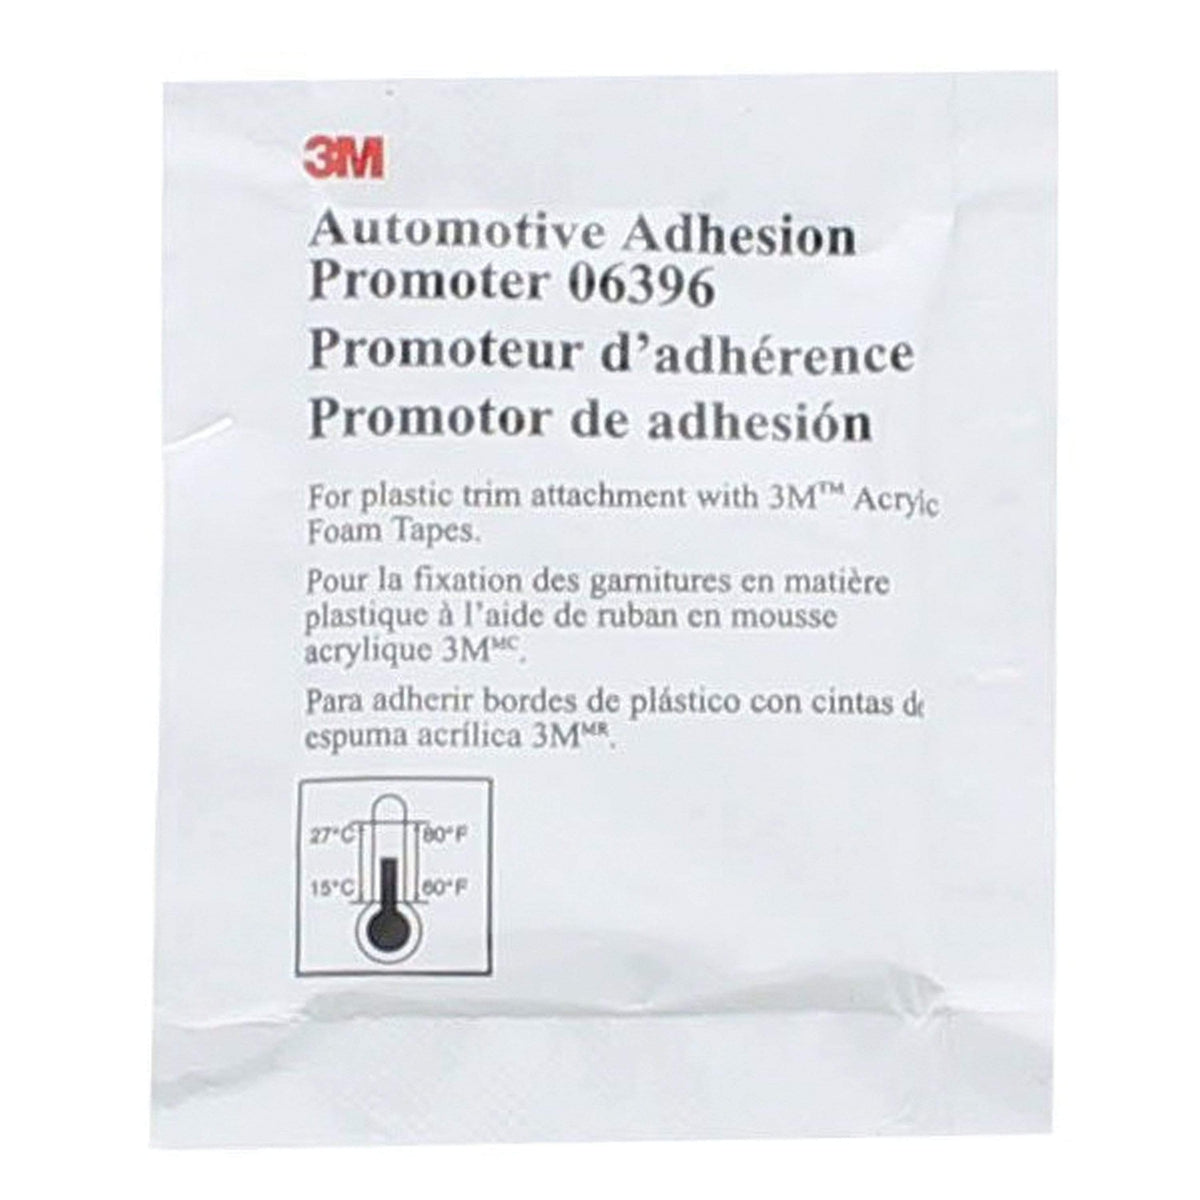 3M Marine Qualifies for Free Shipping 3M Automotive Adhesion Promoter/Sponge Applicator Packet #06396